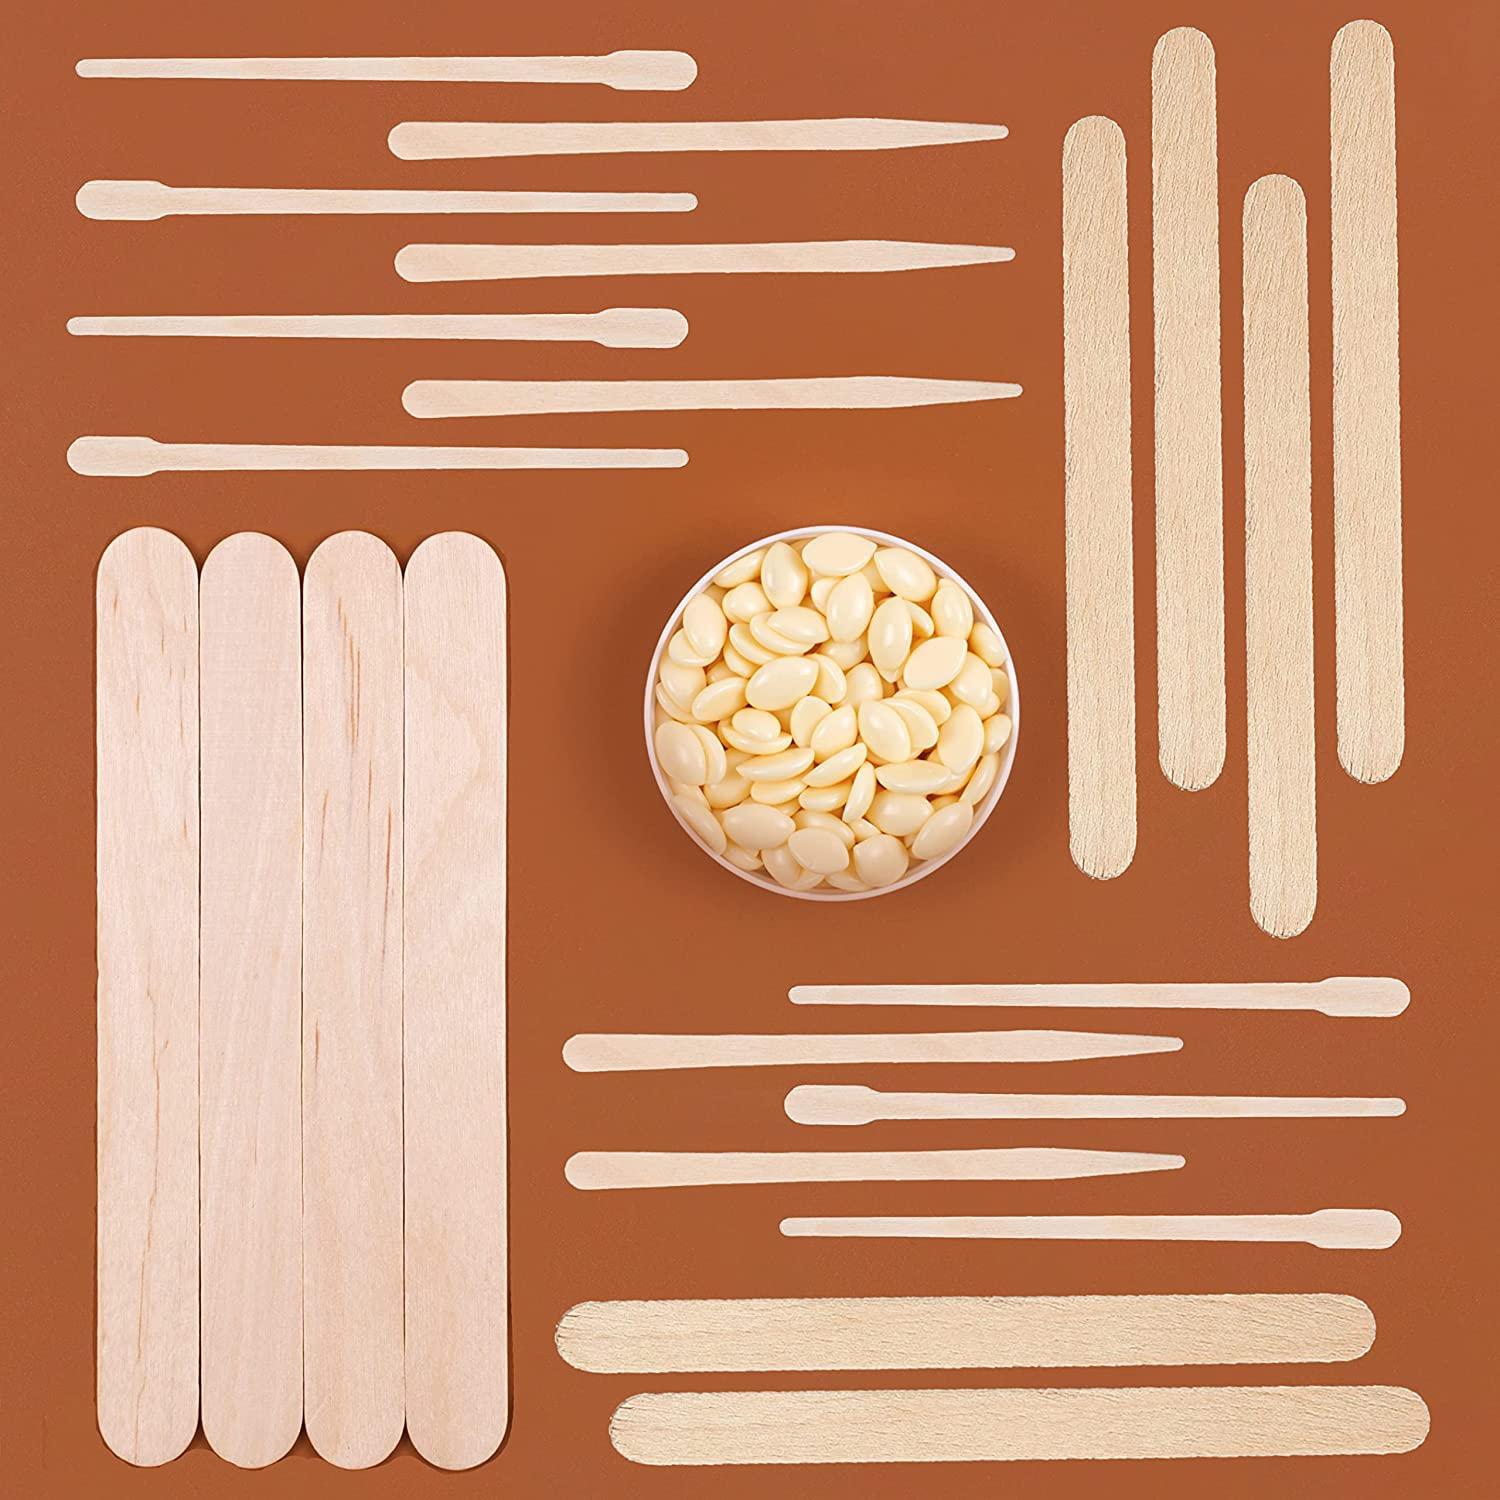  Mibly 4 Style 300 Pcs Assorted Wooden Wax Sticks - for Body  Legs Face and Small Medium Large Sizes Eyebrow Waxing Applicator Spatulas  for Hair Removal or Wood Craft Sticks 